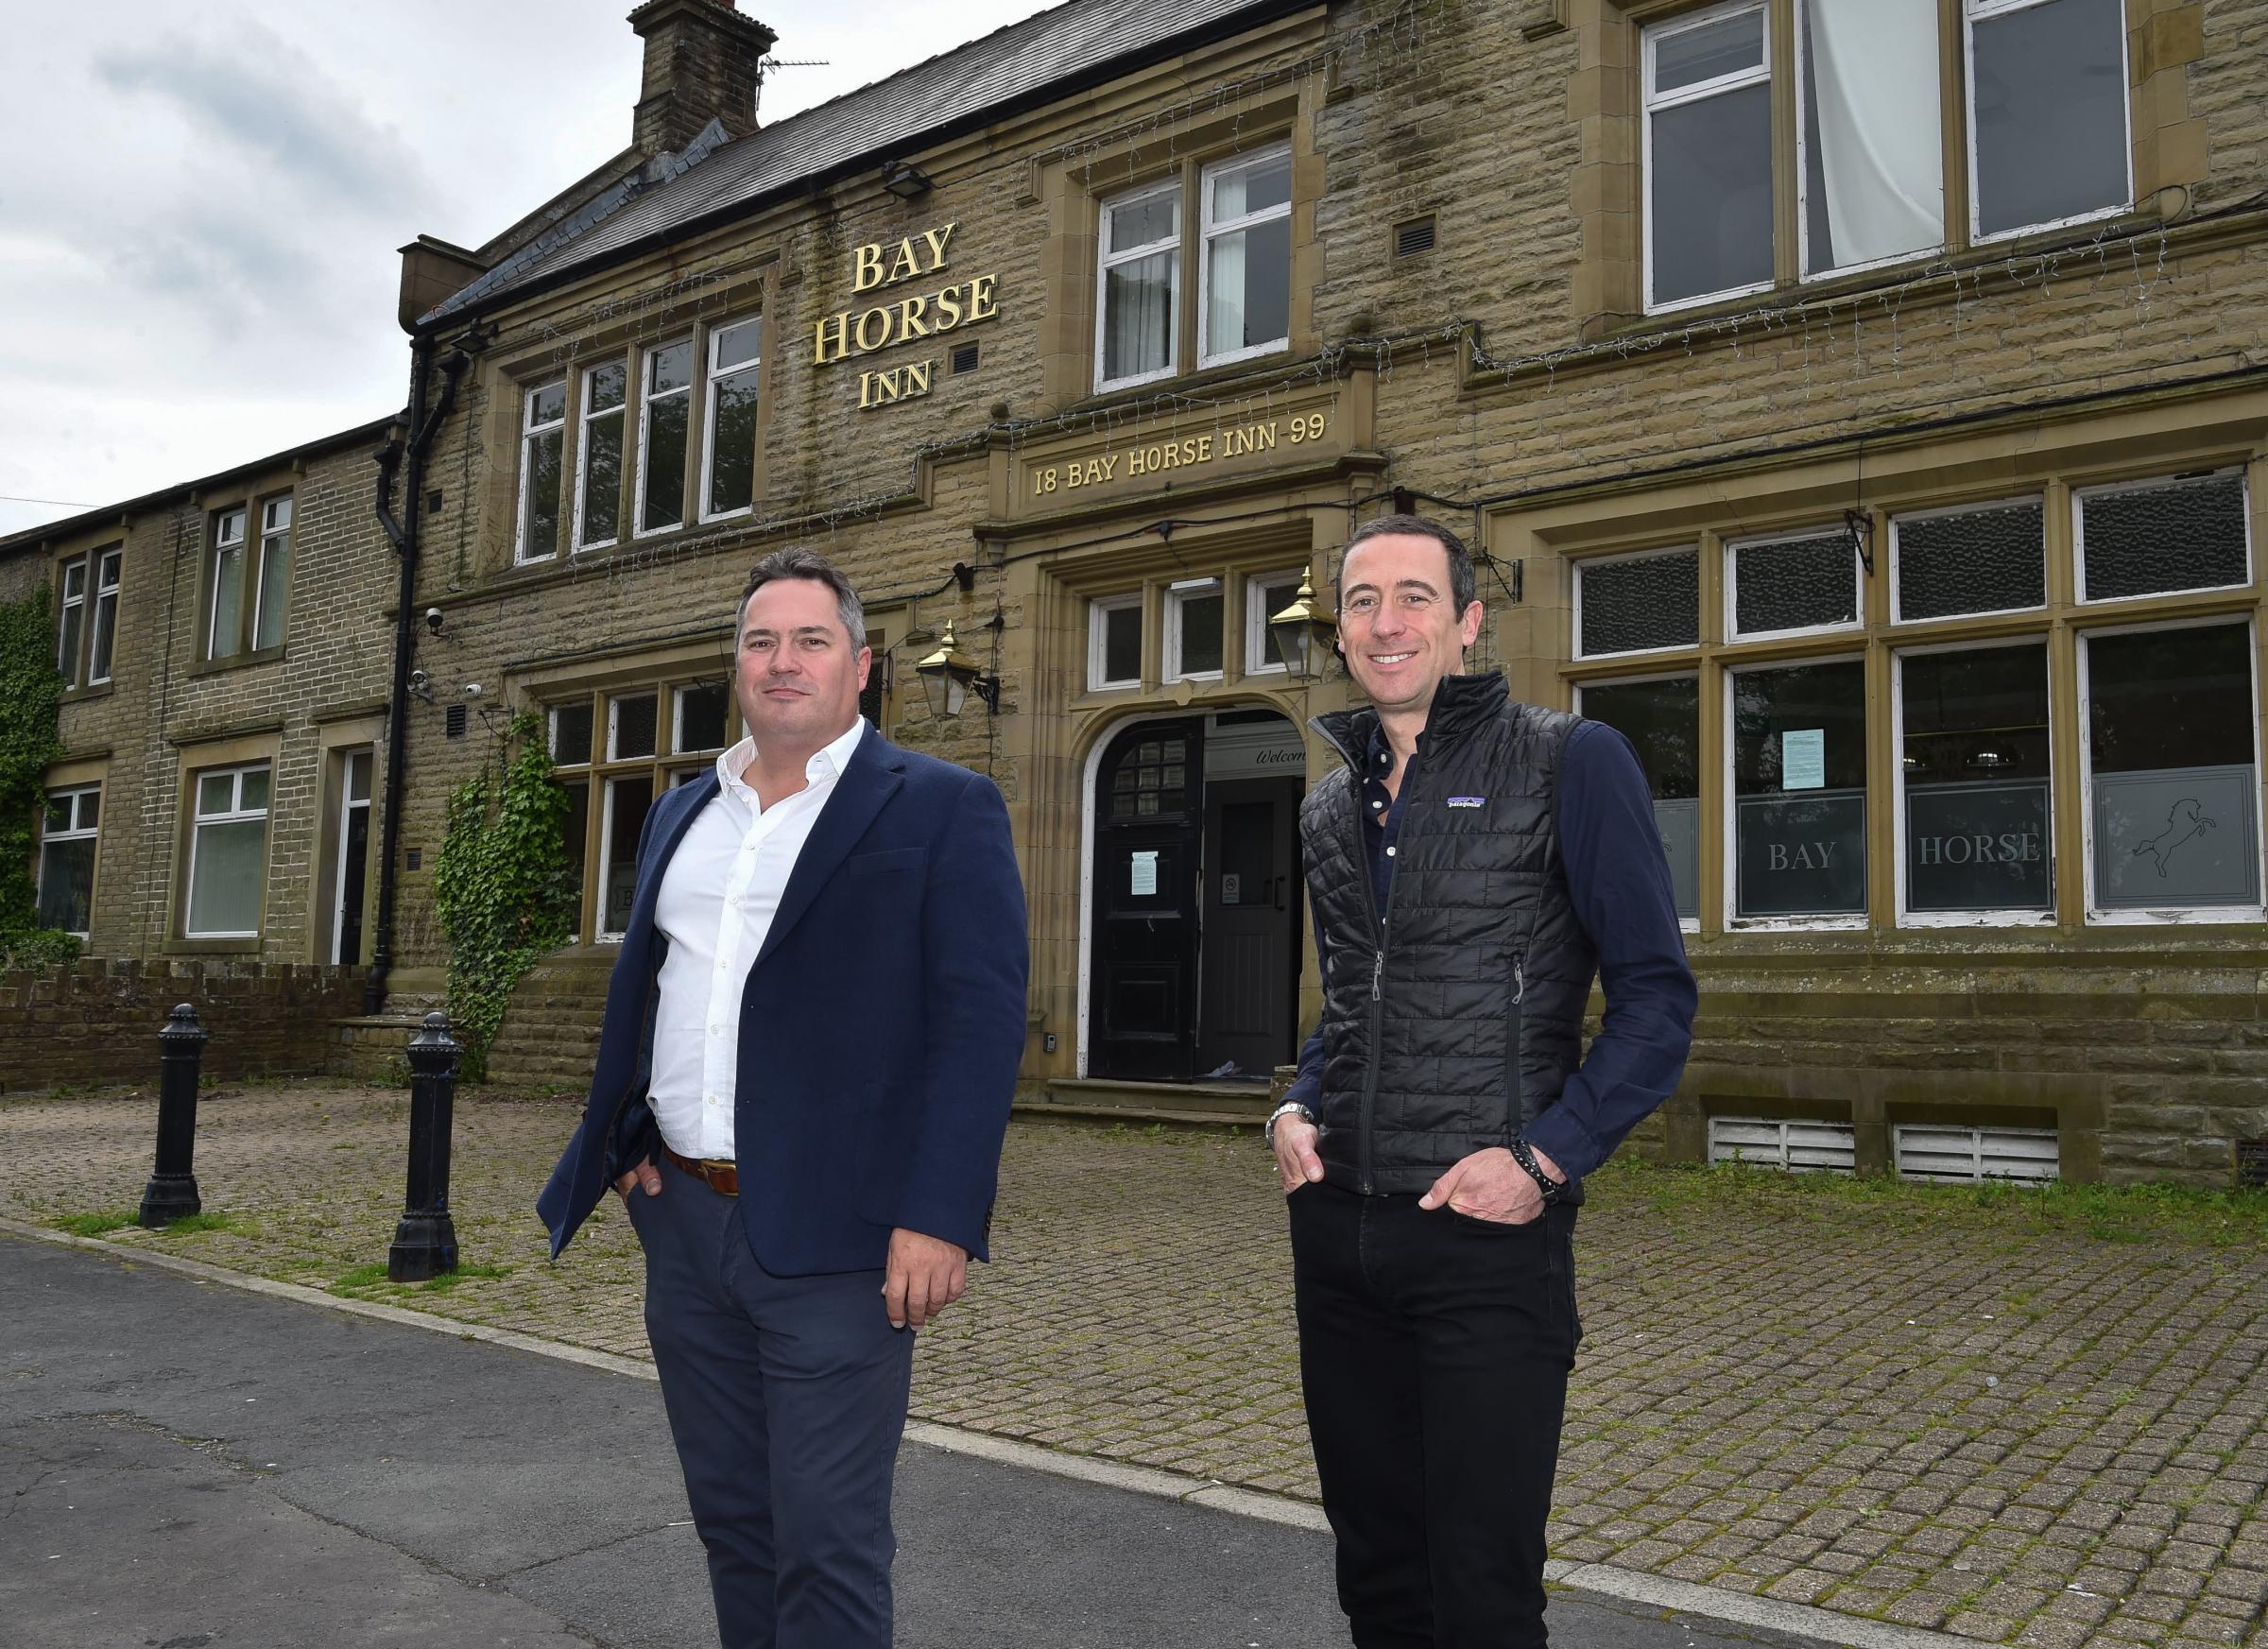 28th May 2021 The Bay Horse, 17 Church Square, Worsthorne, Burnley BB10 3NH L-R Chris Nevin - Director/ Owner / Jon Nevin - Director/ Owner MANDATORY CREDIT: Bernard Platt For editorial use only. Copyright remains property of Bernard Platt Wigan